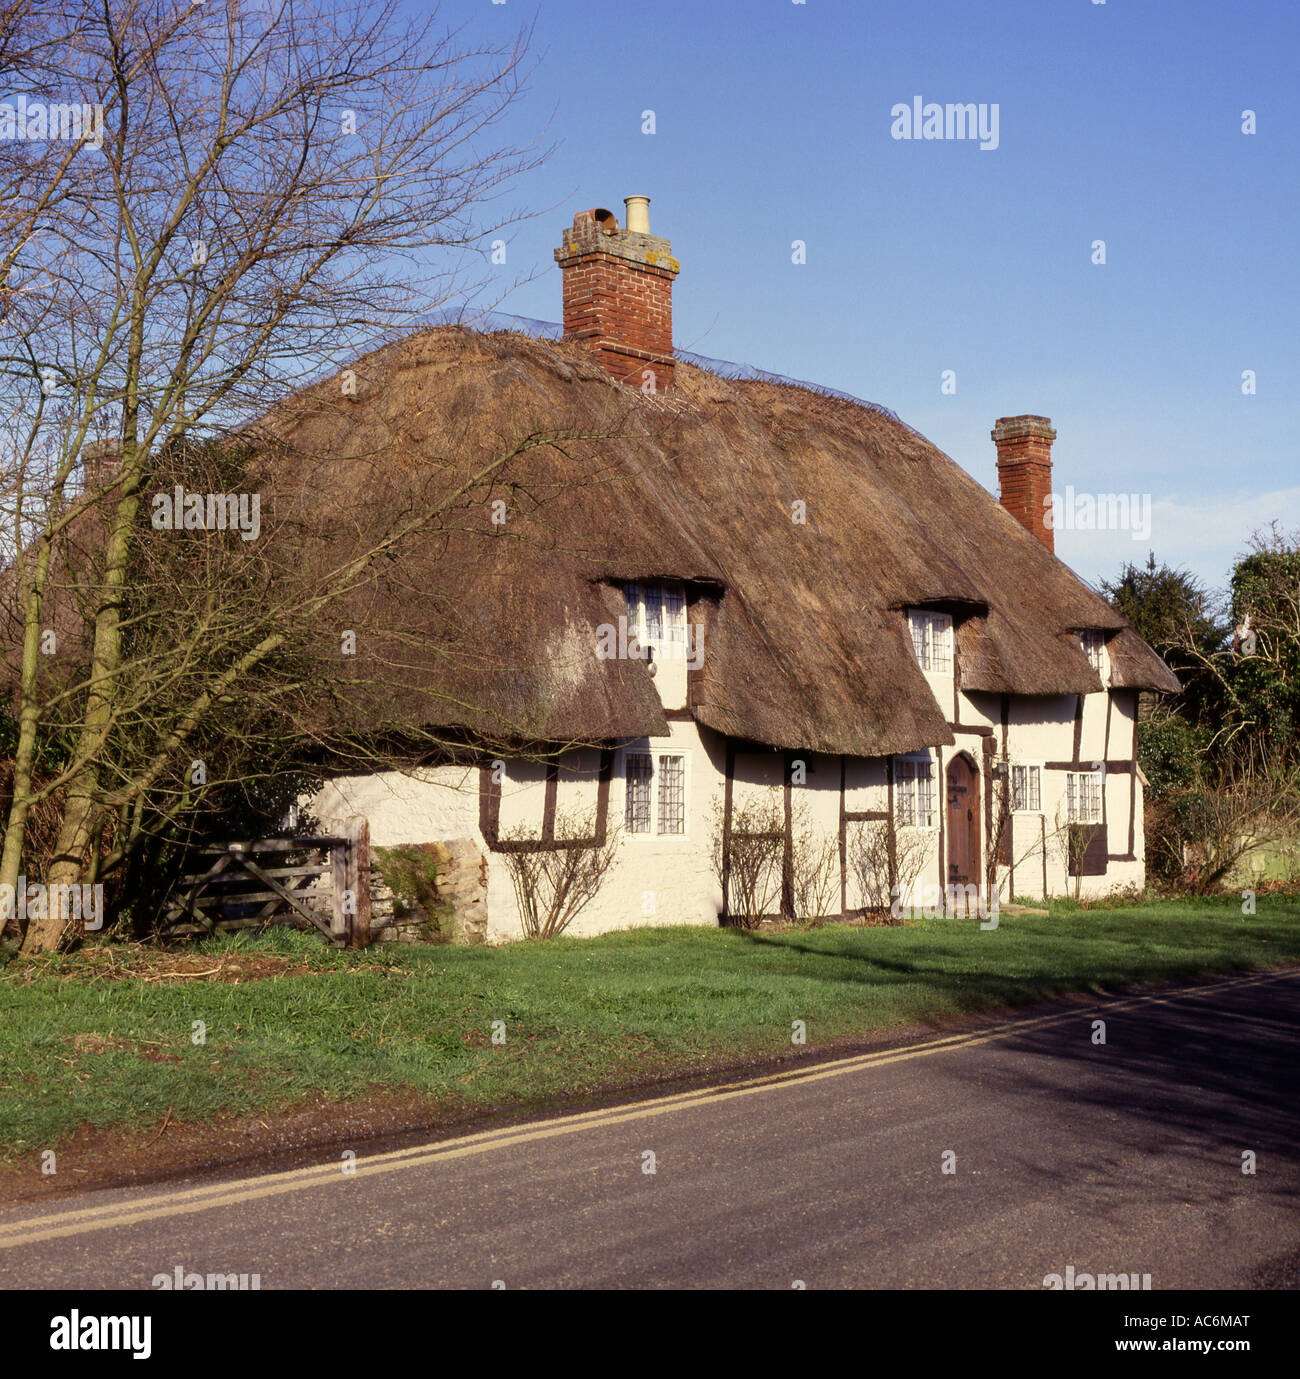 Thatched and whitewashed cottage at Clifton Hampden in Oxfordshire England Stock Photo